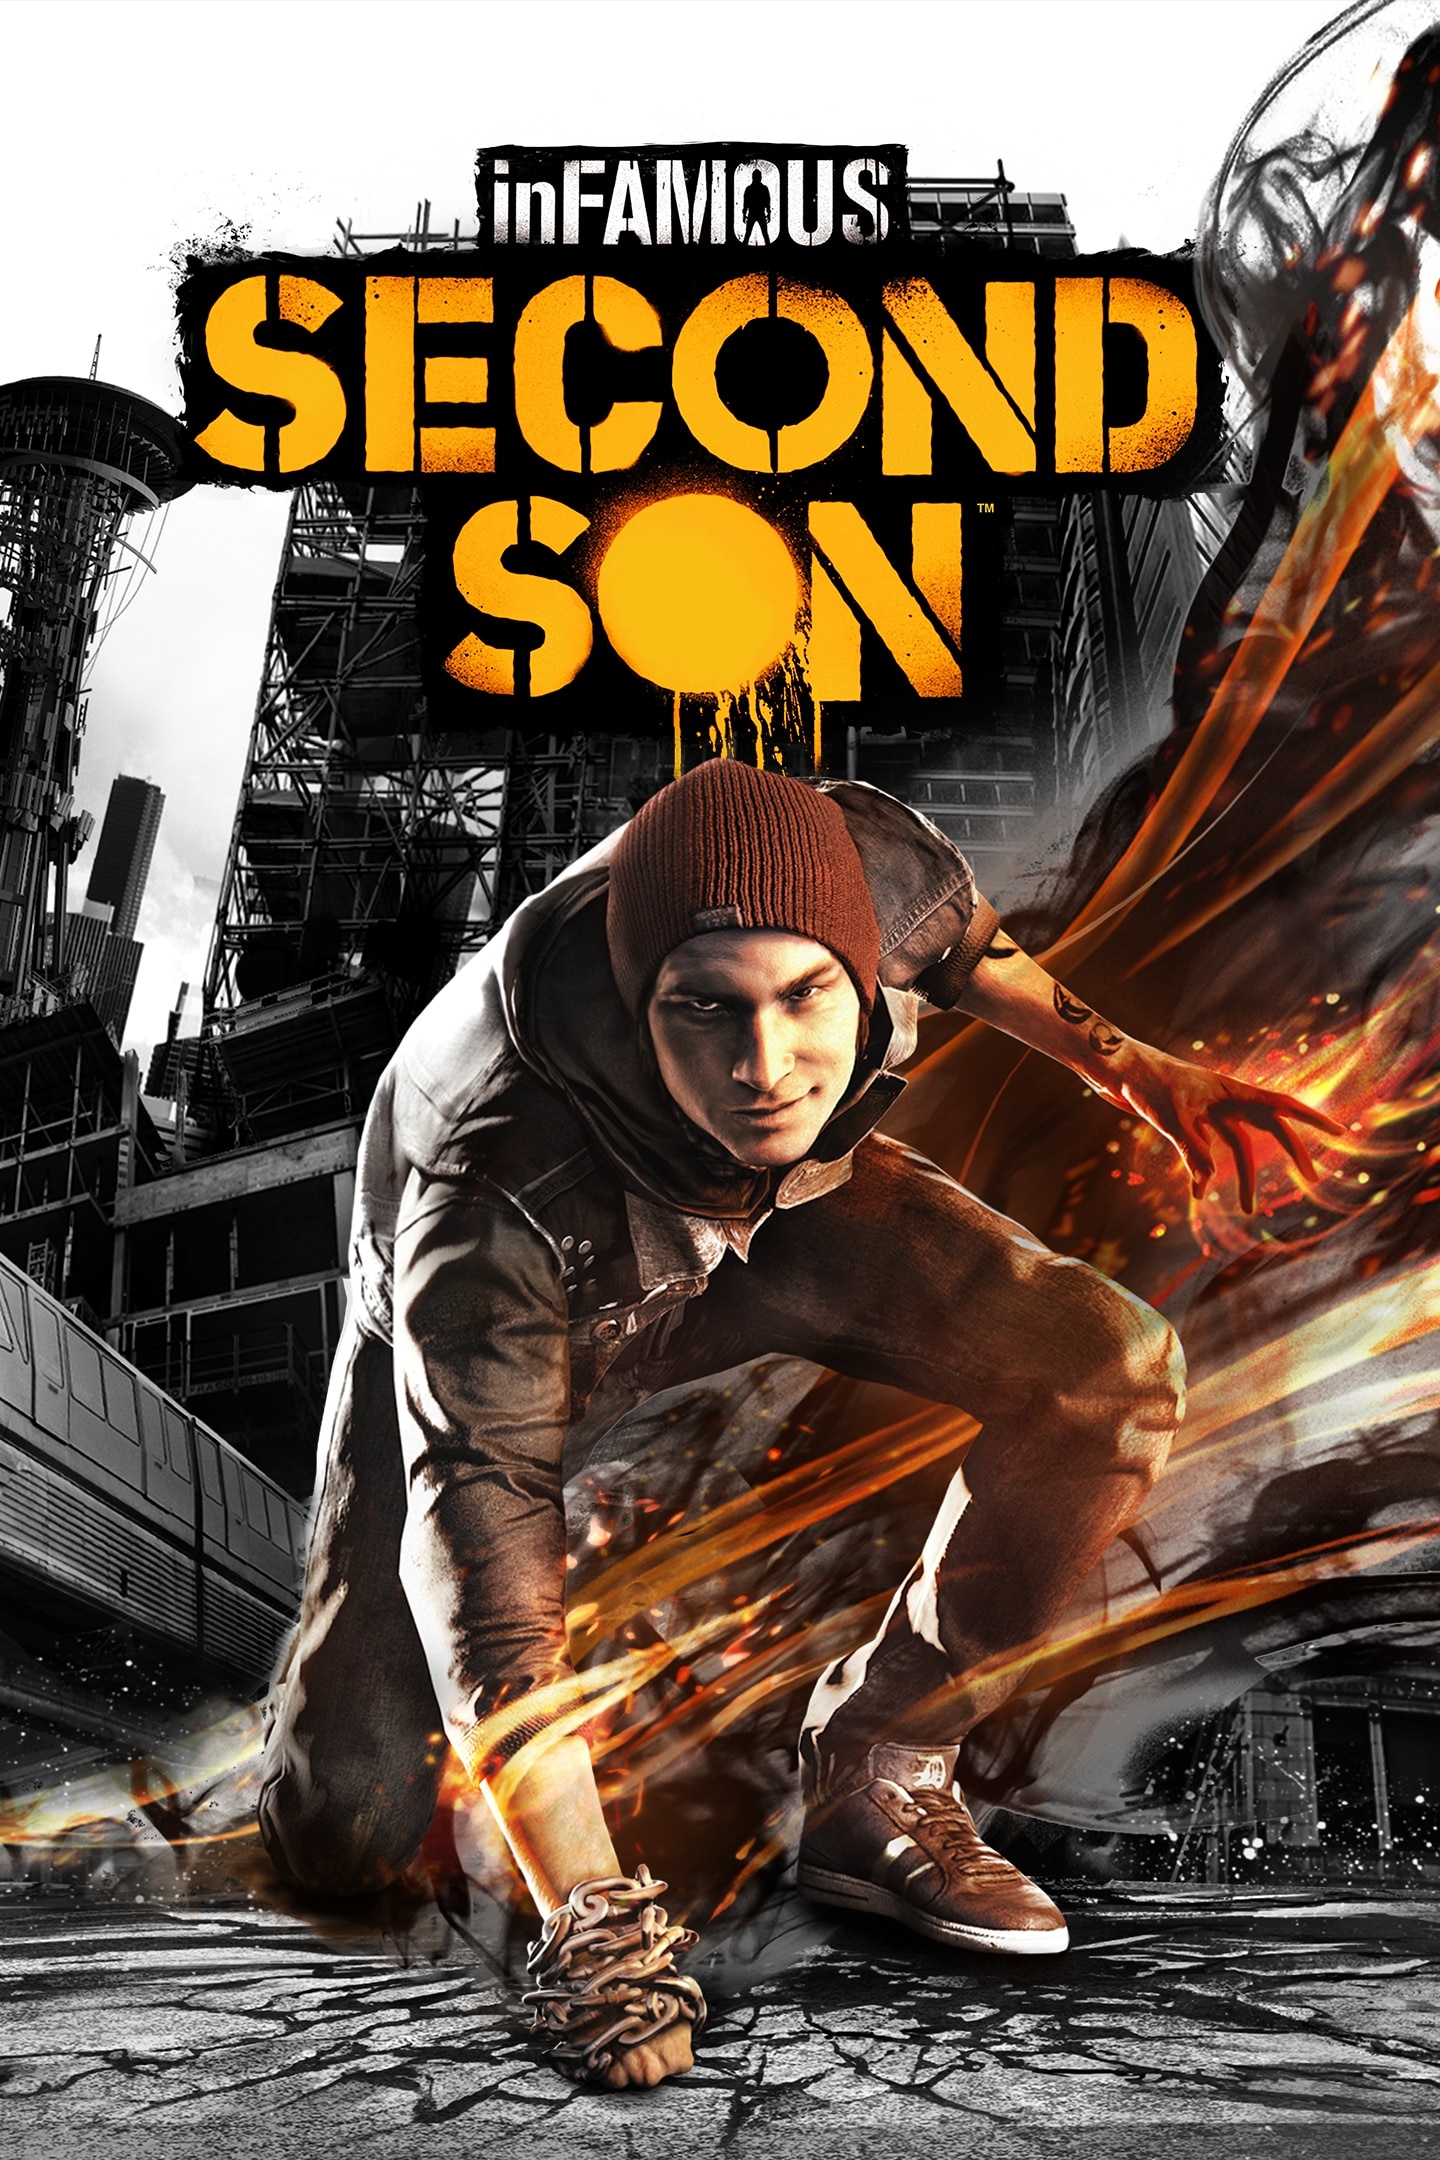 inFAMOUS: Second Son, Superhuman powers, Open-world adventure, Gaming, 1440x2160 HD Handy